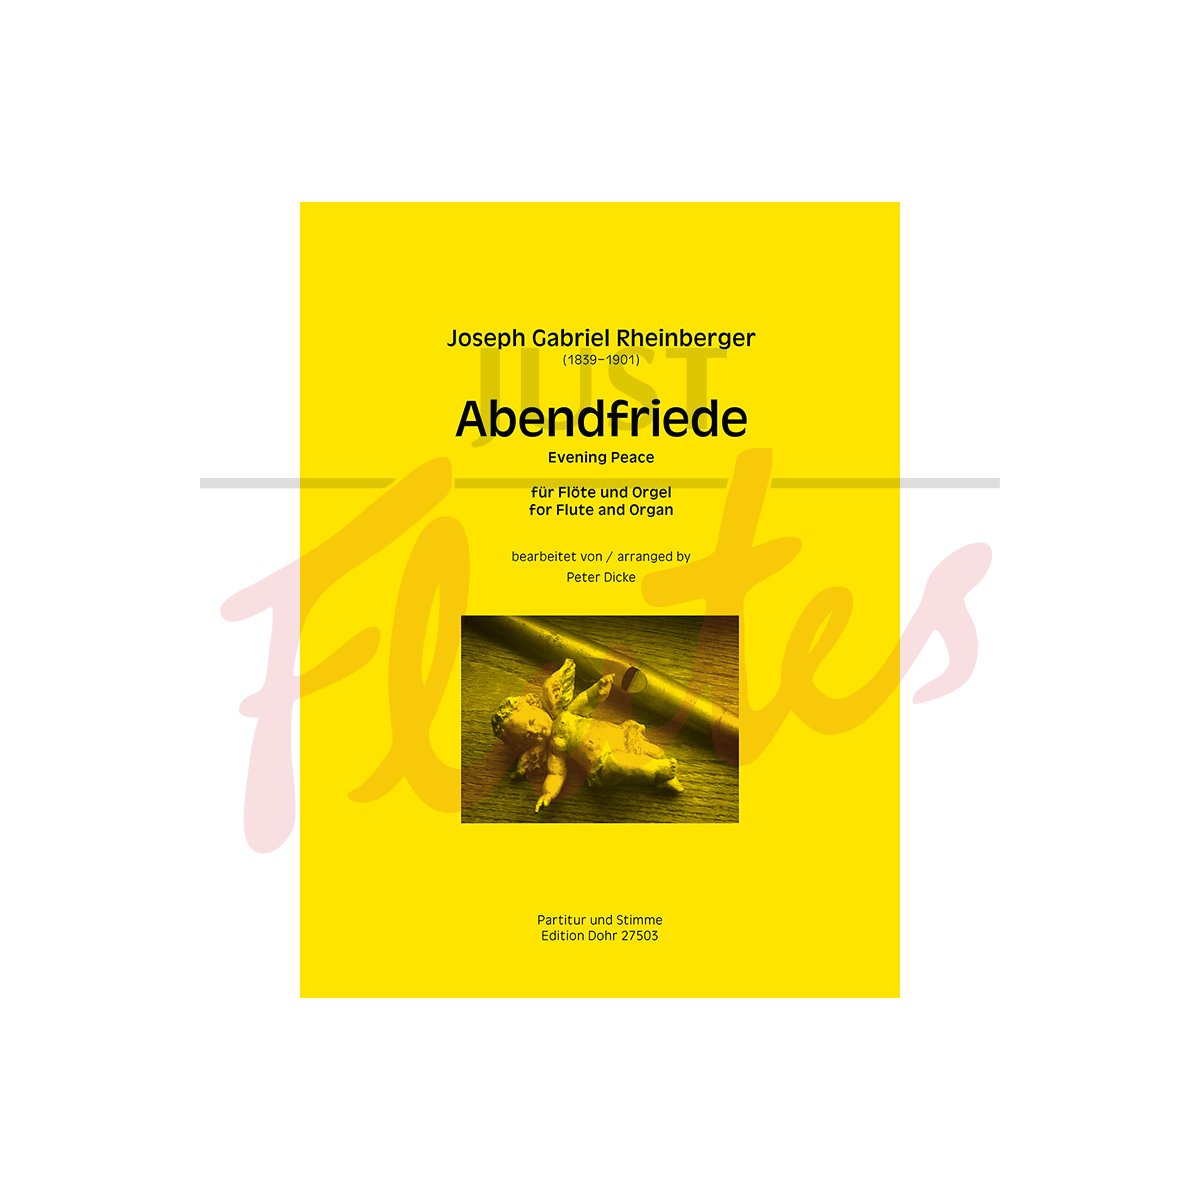 Abendriede for Flute and Organ